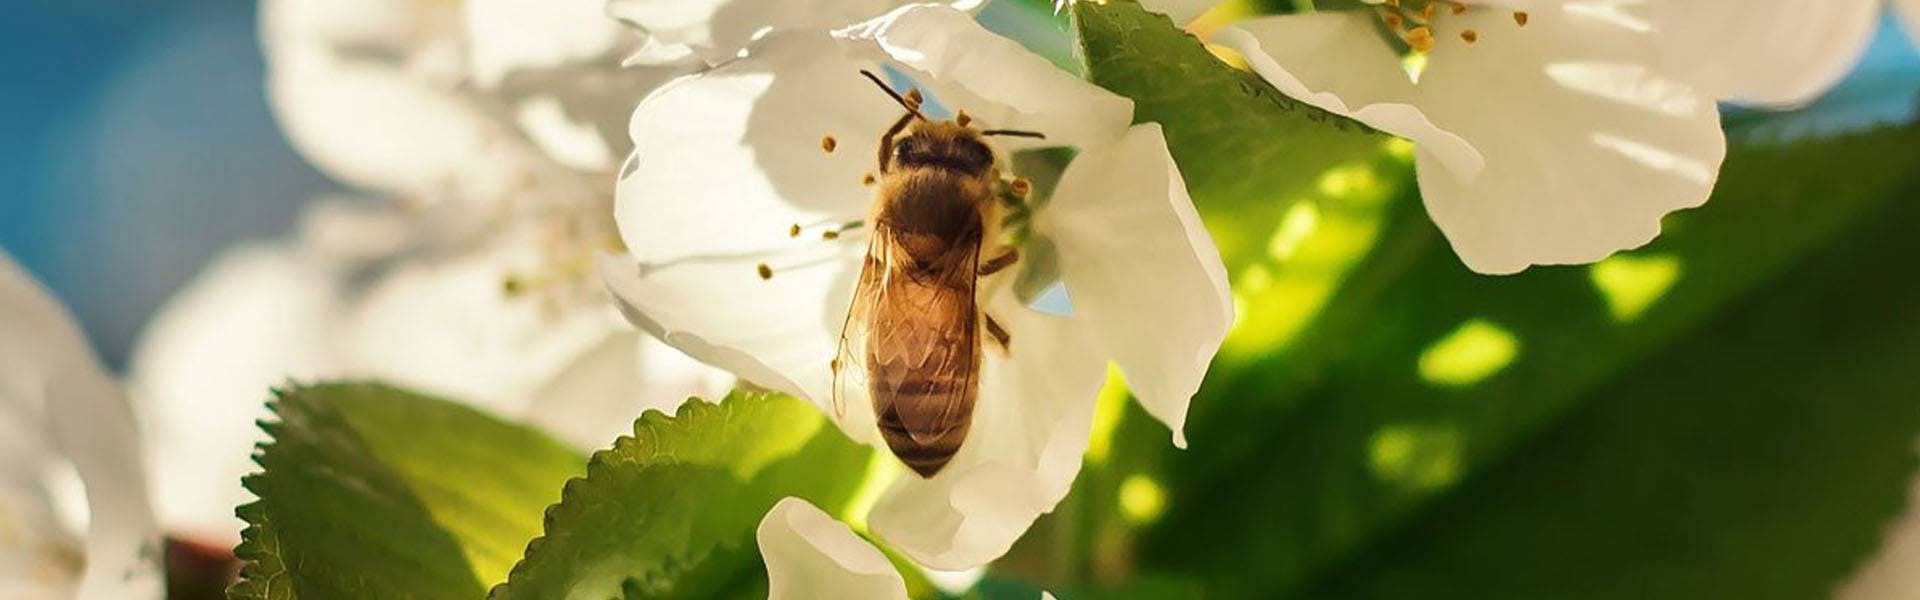 Do you care about bees? Can farmers do something to save them?